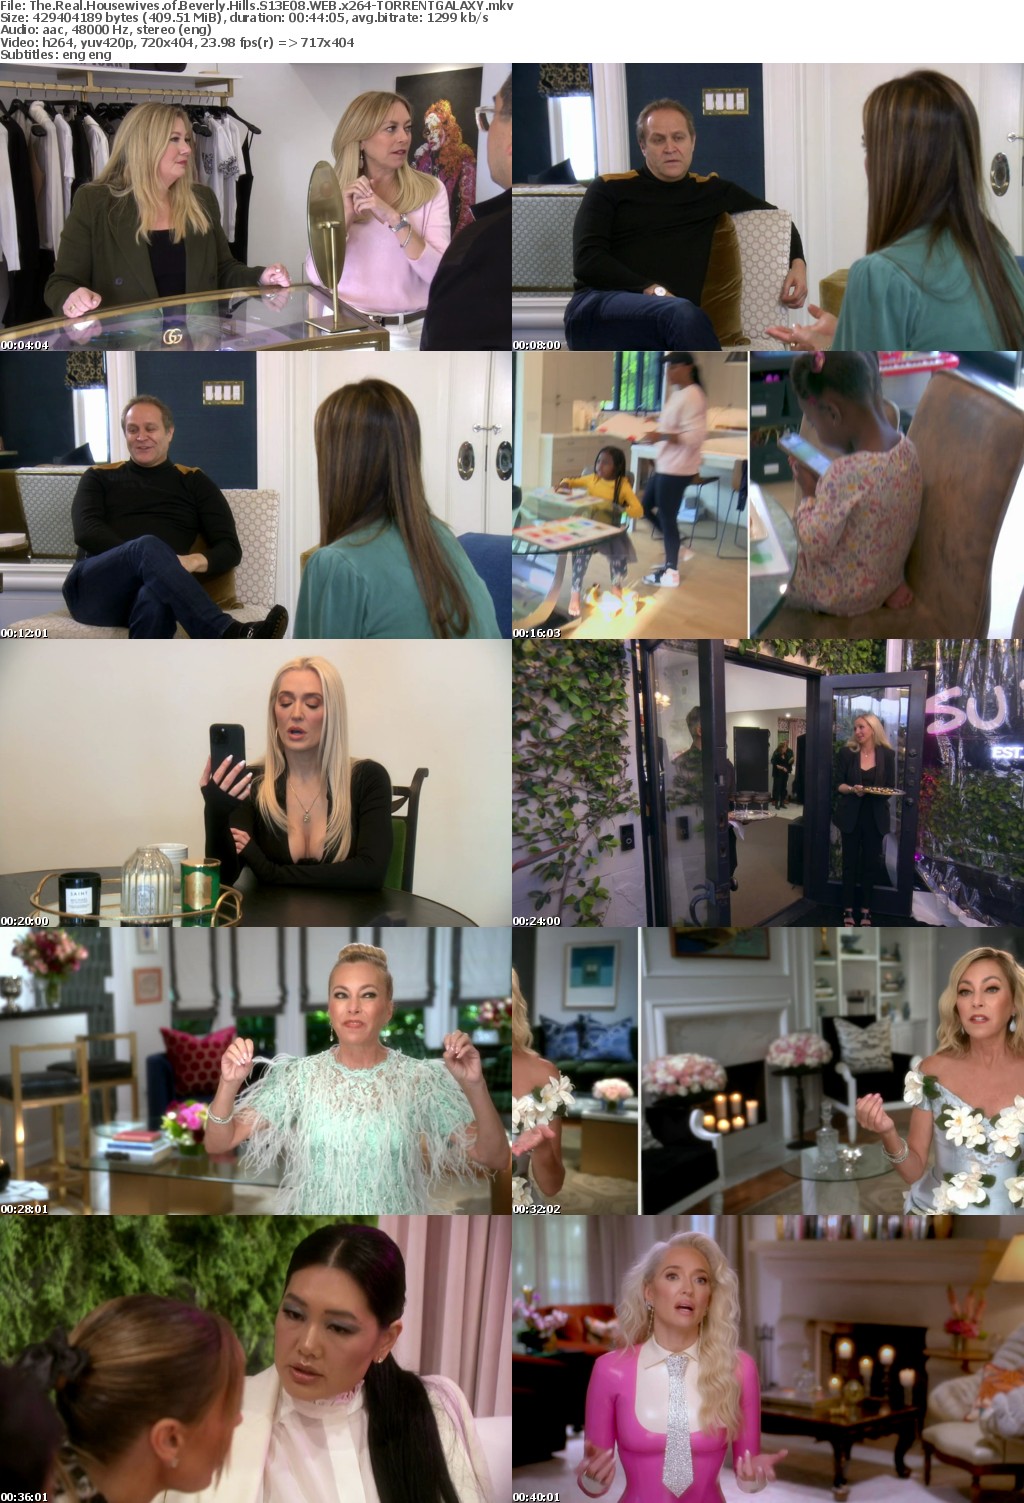 The Real Housewives of Beverly Hills S13E08 WEB x264-GALAXY